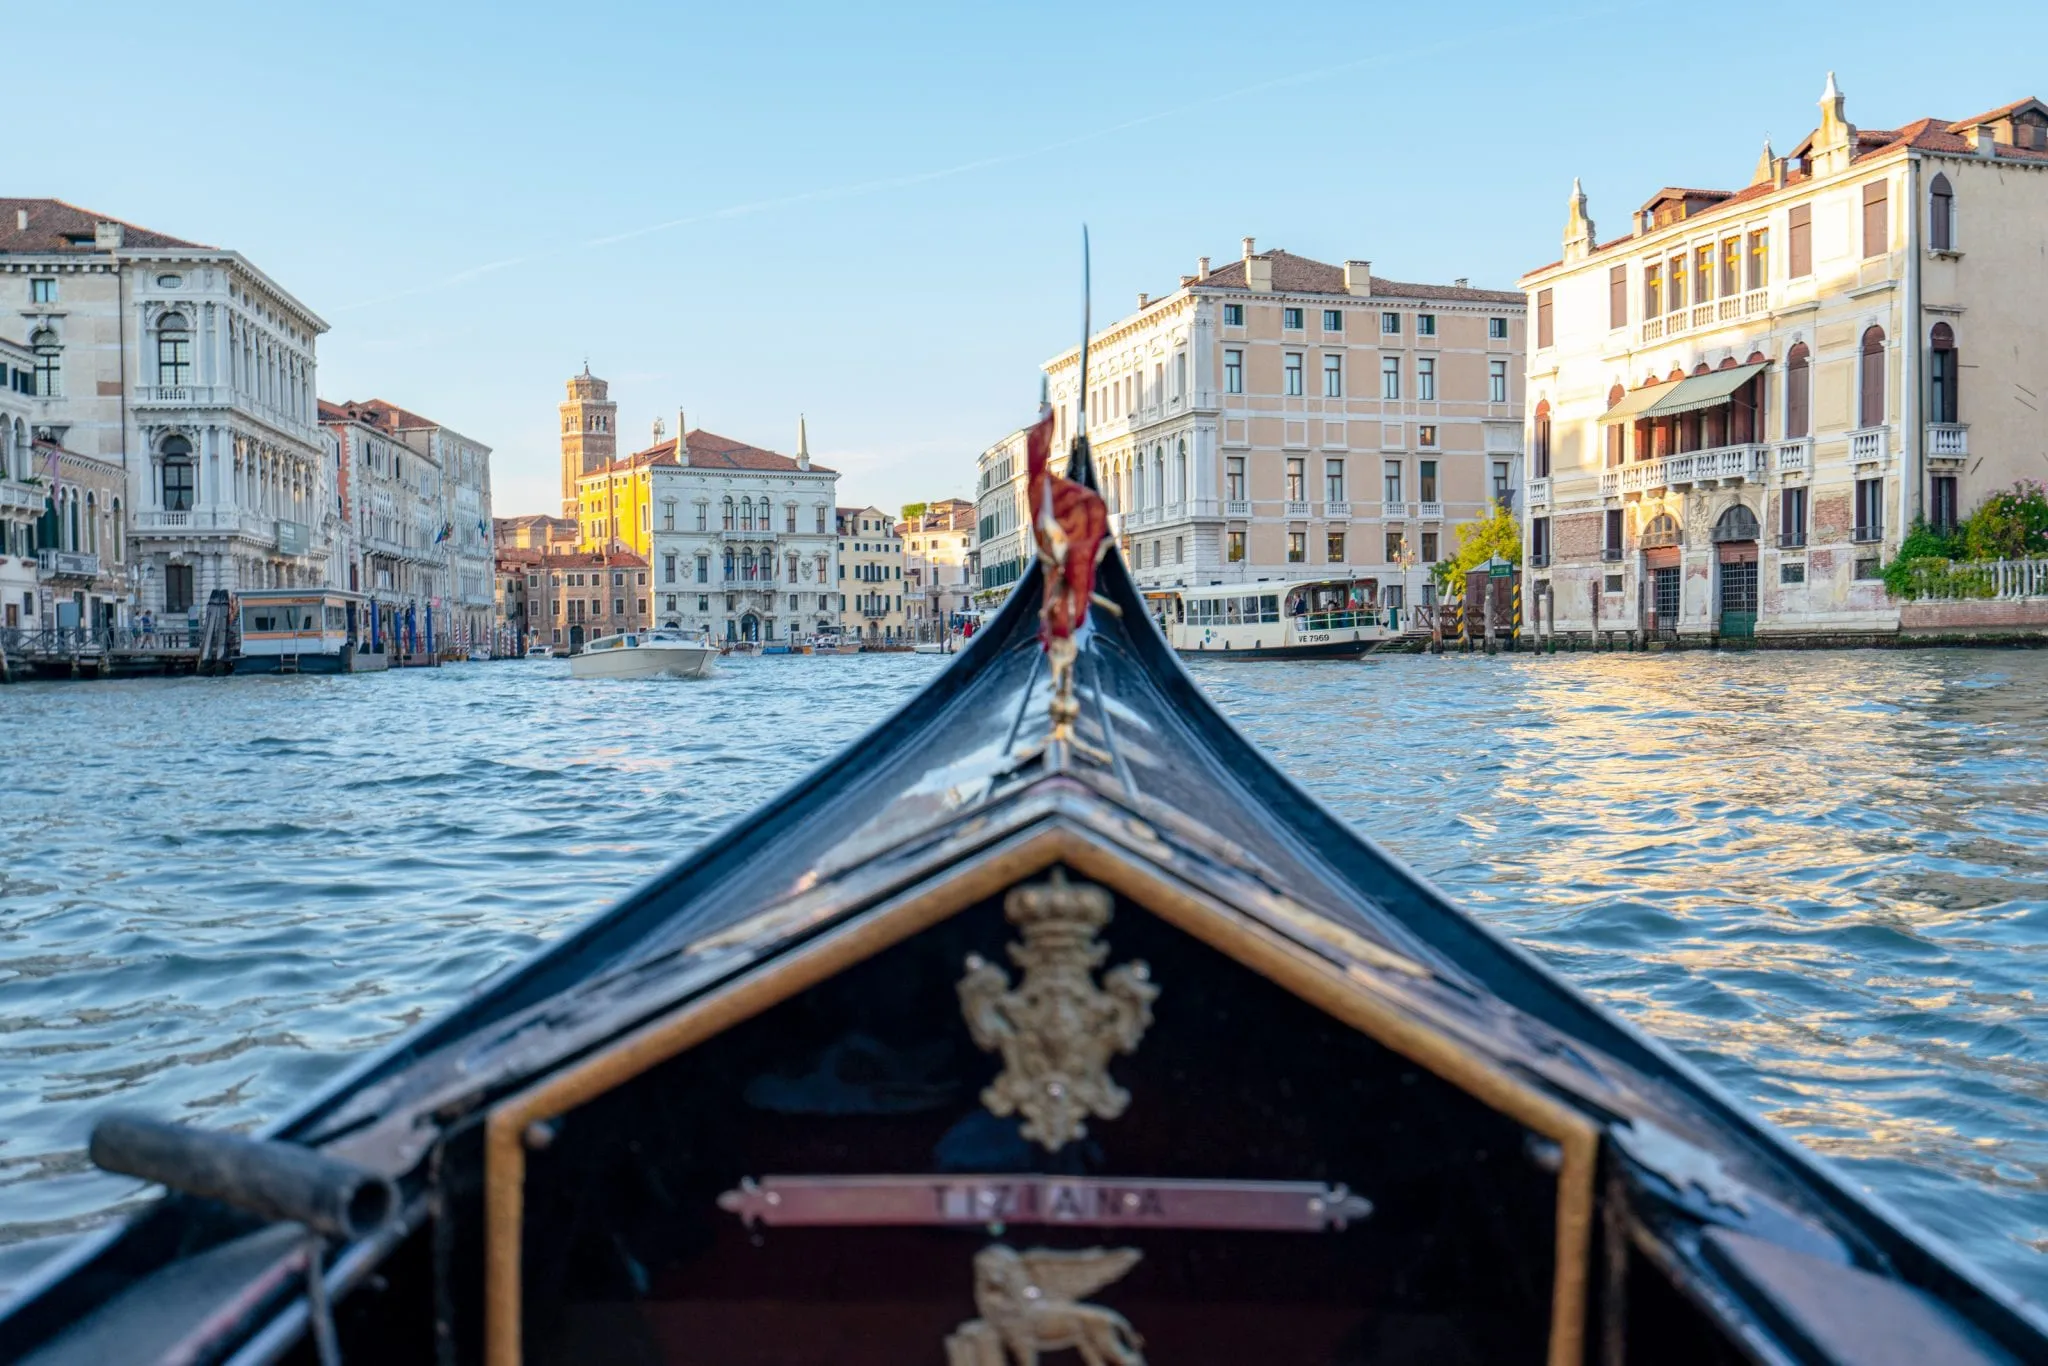 A photo of the front of a Venetian gondola in the foreground with the Grand Canal in the background--the absolute best views of Venice can be found from inside a gondola!